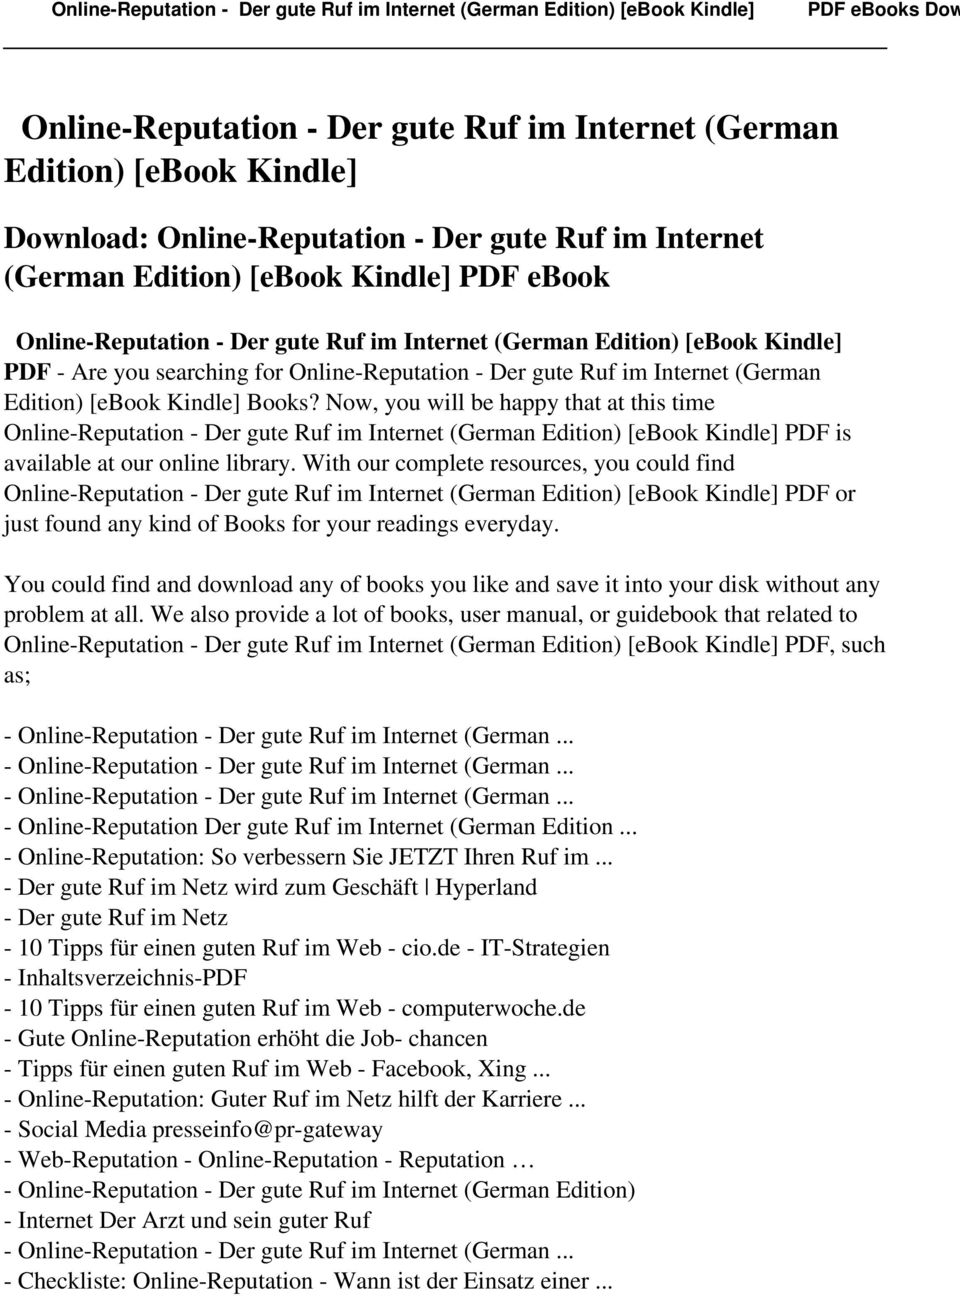 Now, you will be happy that at this time Online-Reputation - Der gute Ruf im Internet (German Edition) [ebook Kindle] PDF is available at our online library.